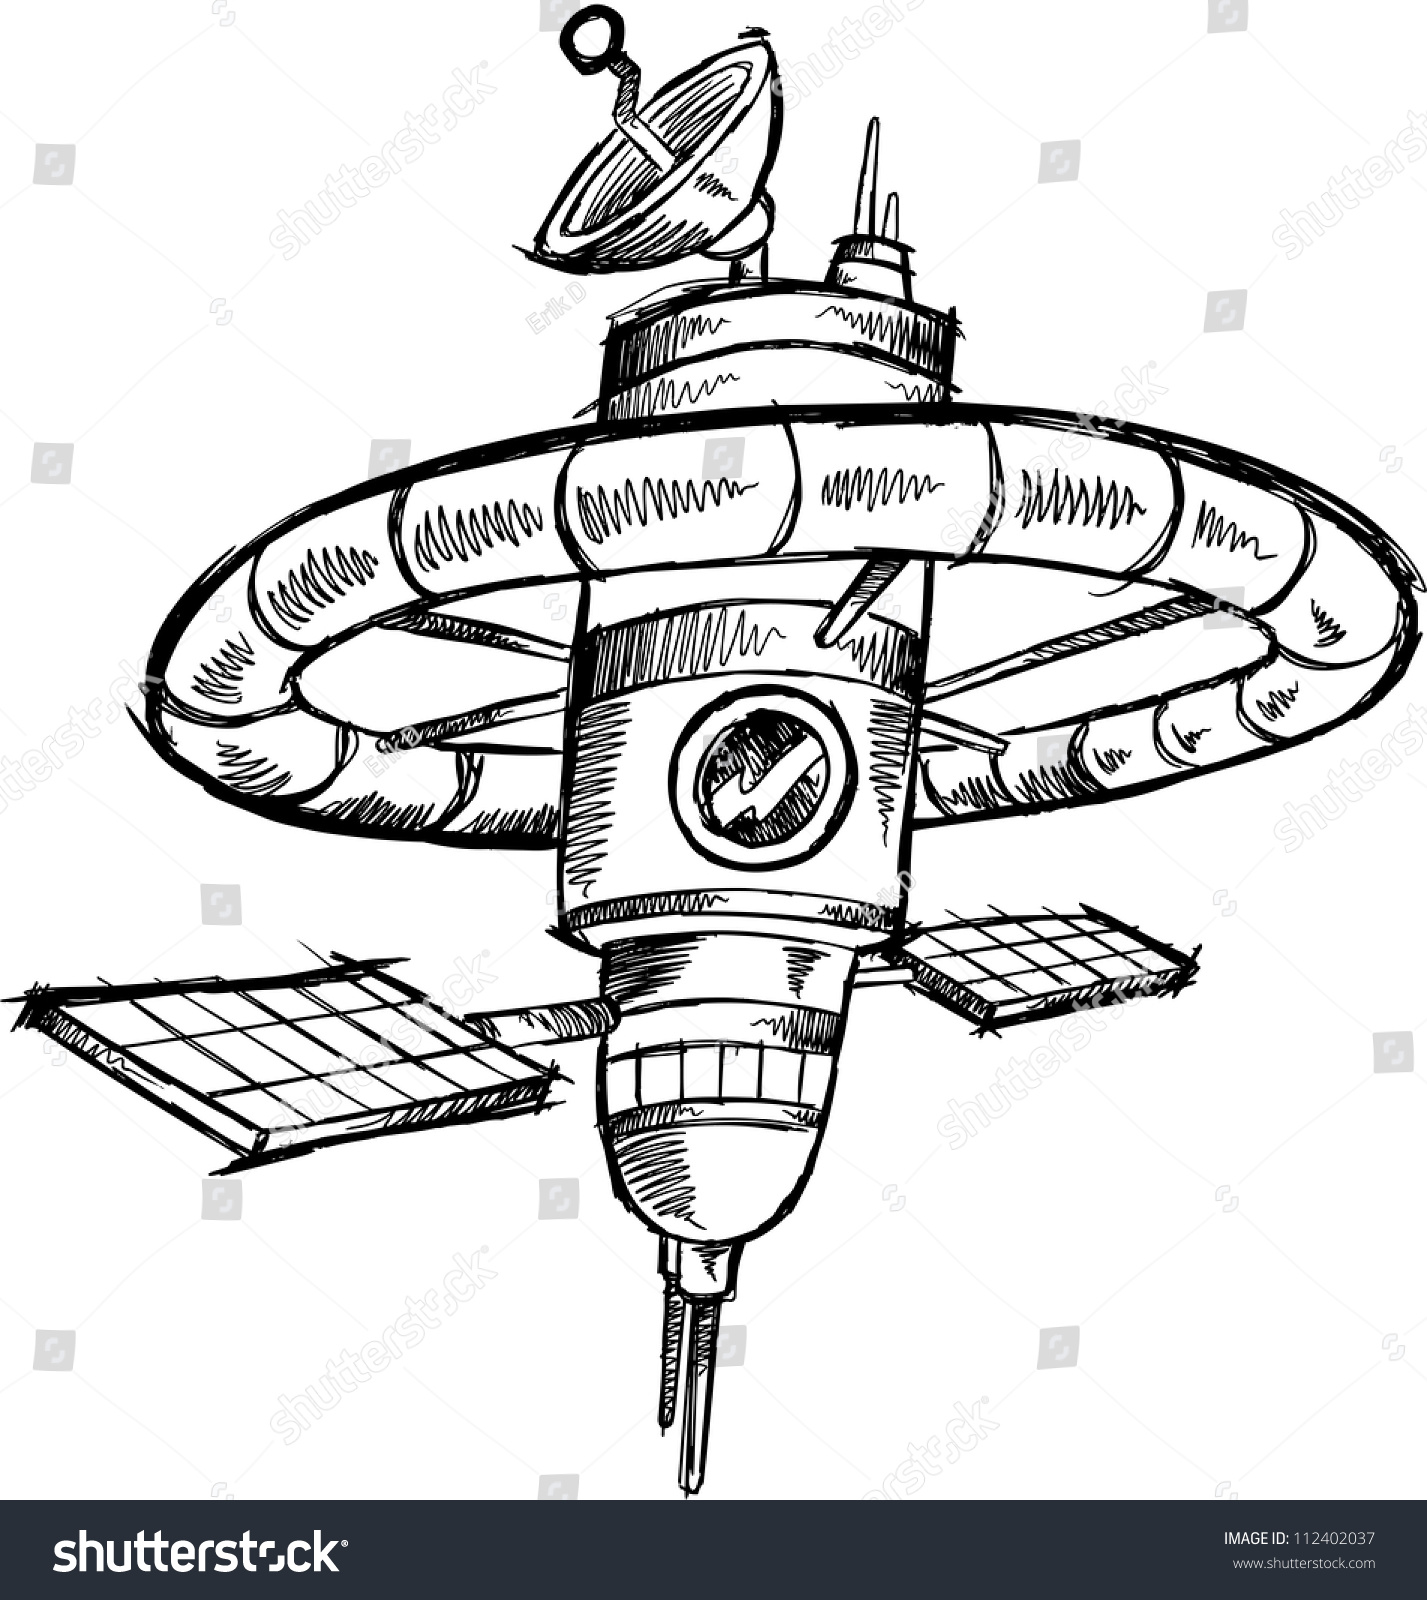 space station clipart - photo #46